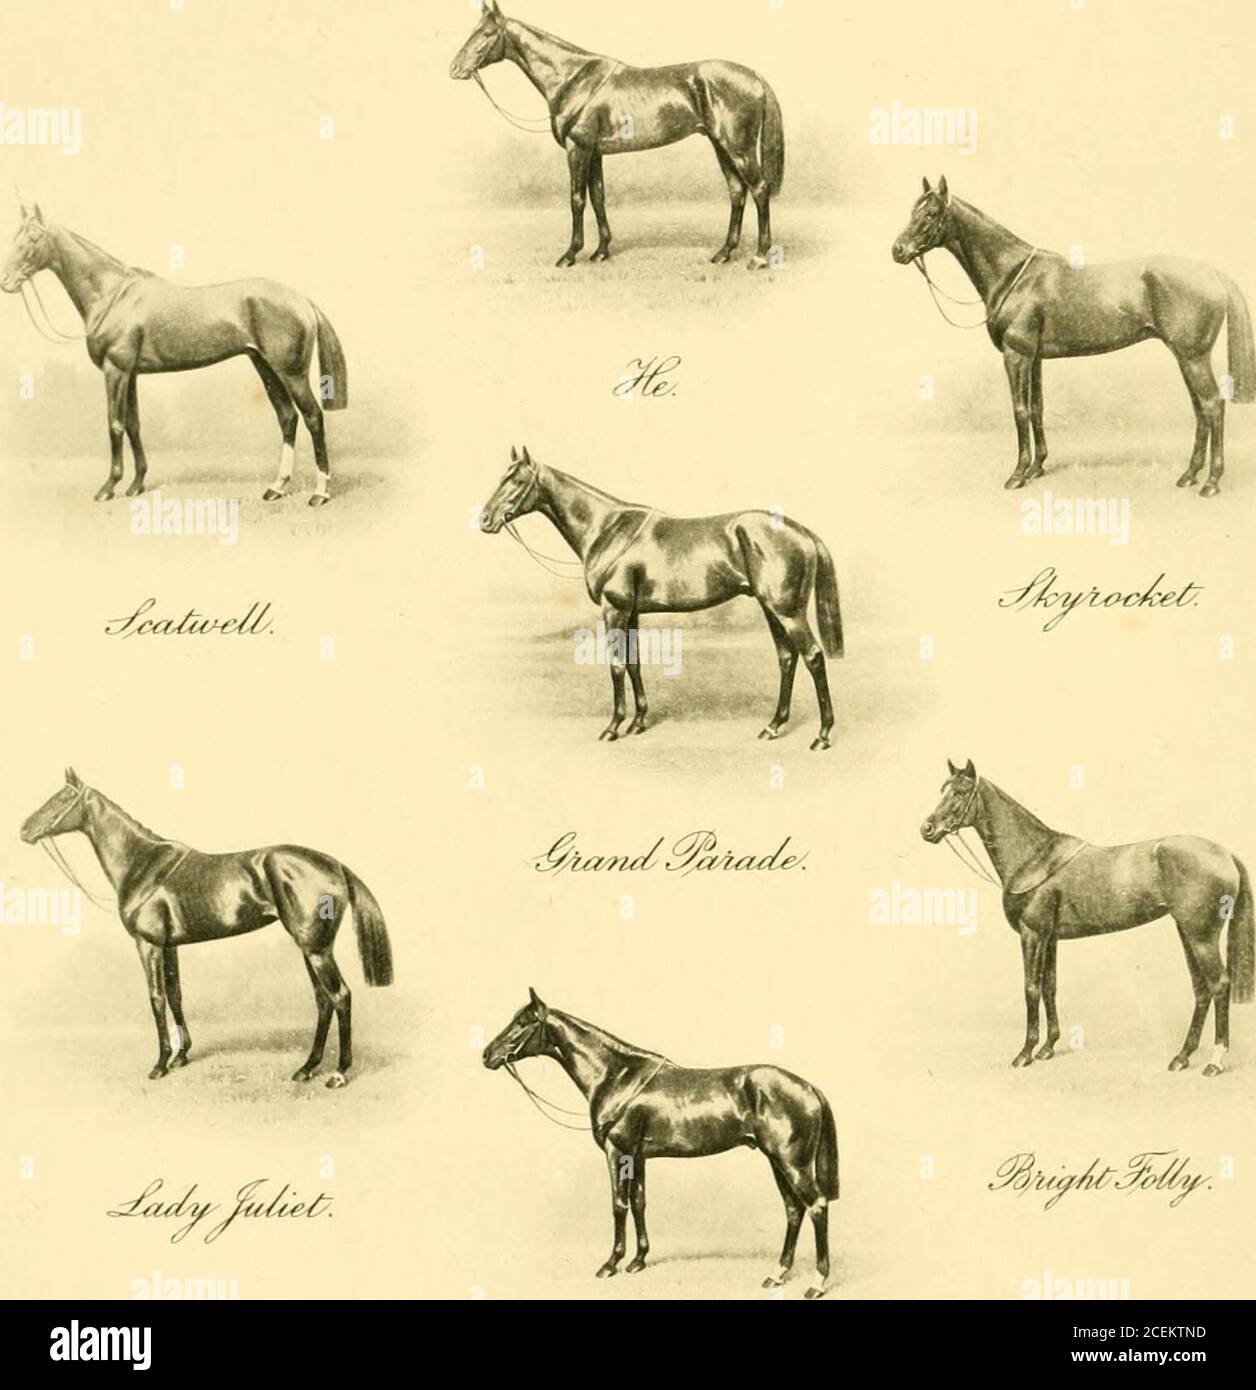 . A great year Lord Glanely's horses. Carslake - Mr. A. Bendons Most Beautiful, 8 st. 7 lb. - F. Lane Sir E. Cassels Indenture, 8 st. 7 lb. - - J. Ledson - Mr. W. Raphaels Lomelie, 8 st. 7 lb. - F. Slade Duke of Westminsters Princess Joan, 8 st. 7 lb. - - - - - - - F. Templeman - 100/30 agst. Sunny Moya, 7/2 Lomelie, 5/1 Mount Royal andBright Folly, io/l Woodrow, 100/8 Most Beautiful. Won bya length, 4 lengths between second and third ; Most Beautifulwould not go up to the tapes and was ignored and left at thepost. Half-an-hour later Lord Glanely carried off hisseventh race at the meeting, the Stock Photo